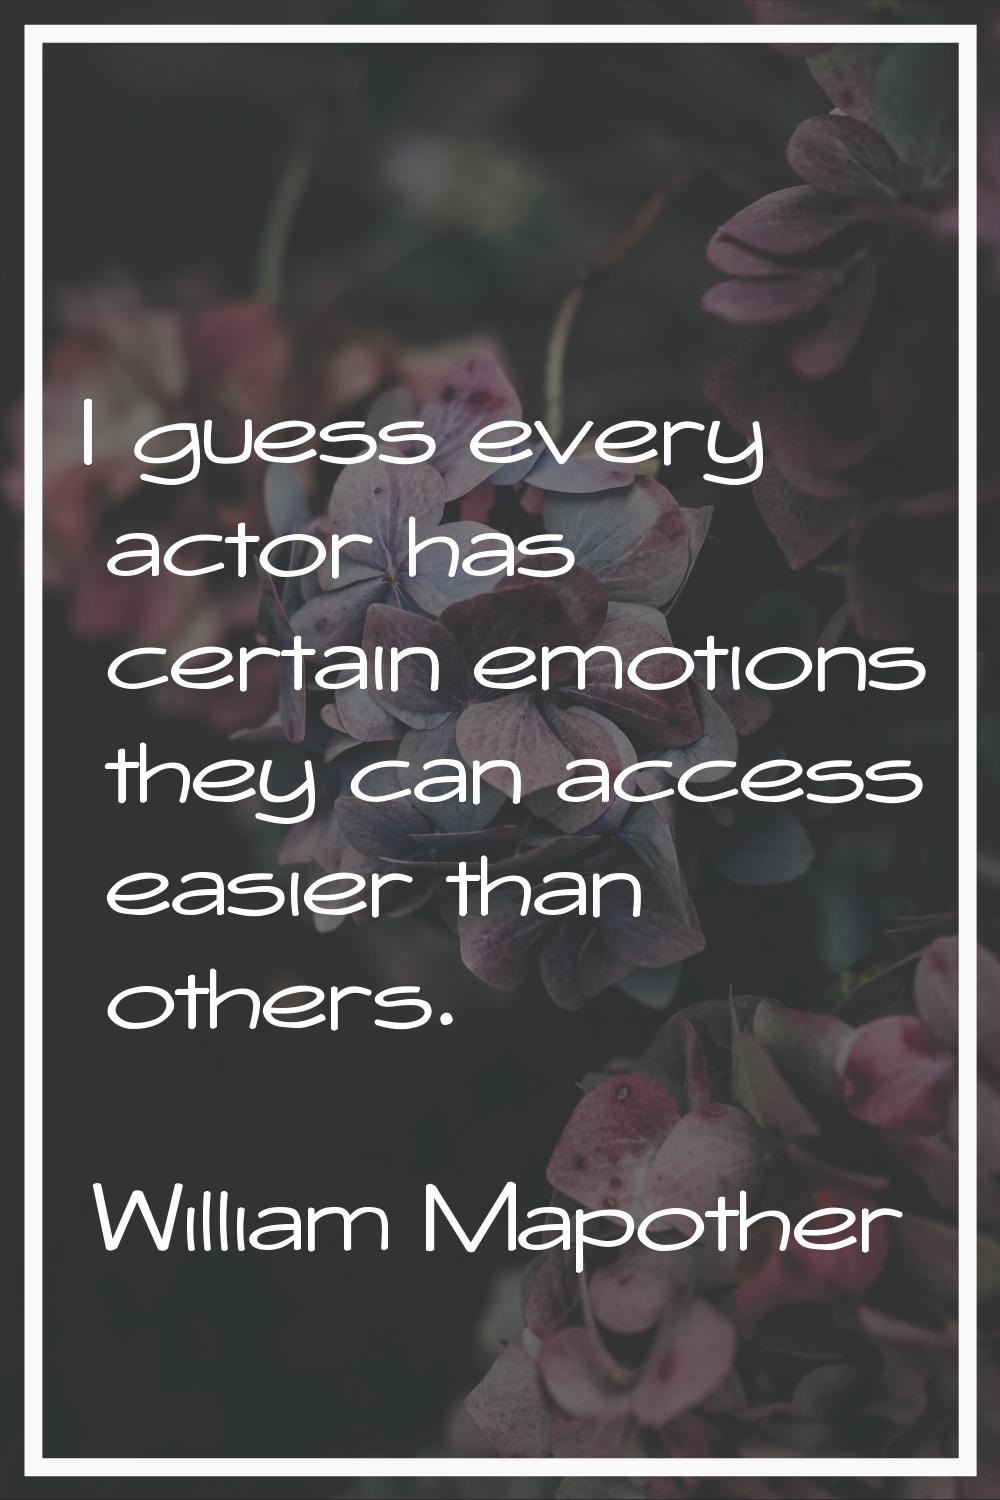 I guess every actor has certain emotions they can access easier than others.